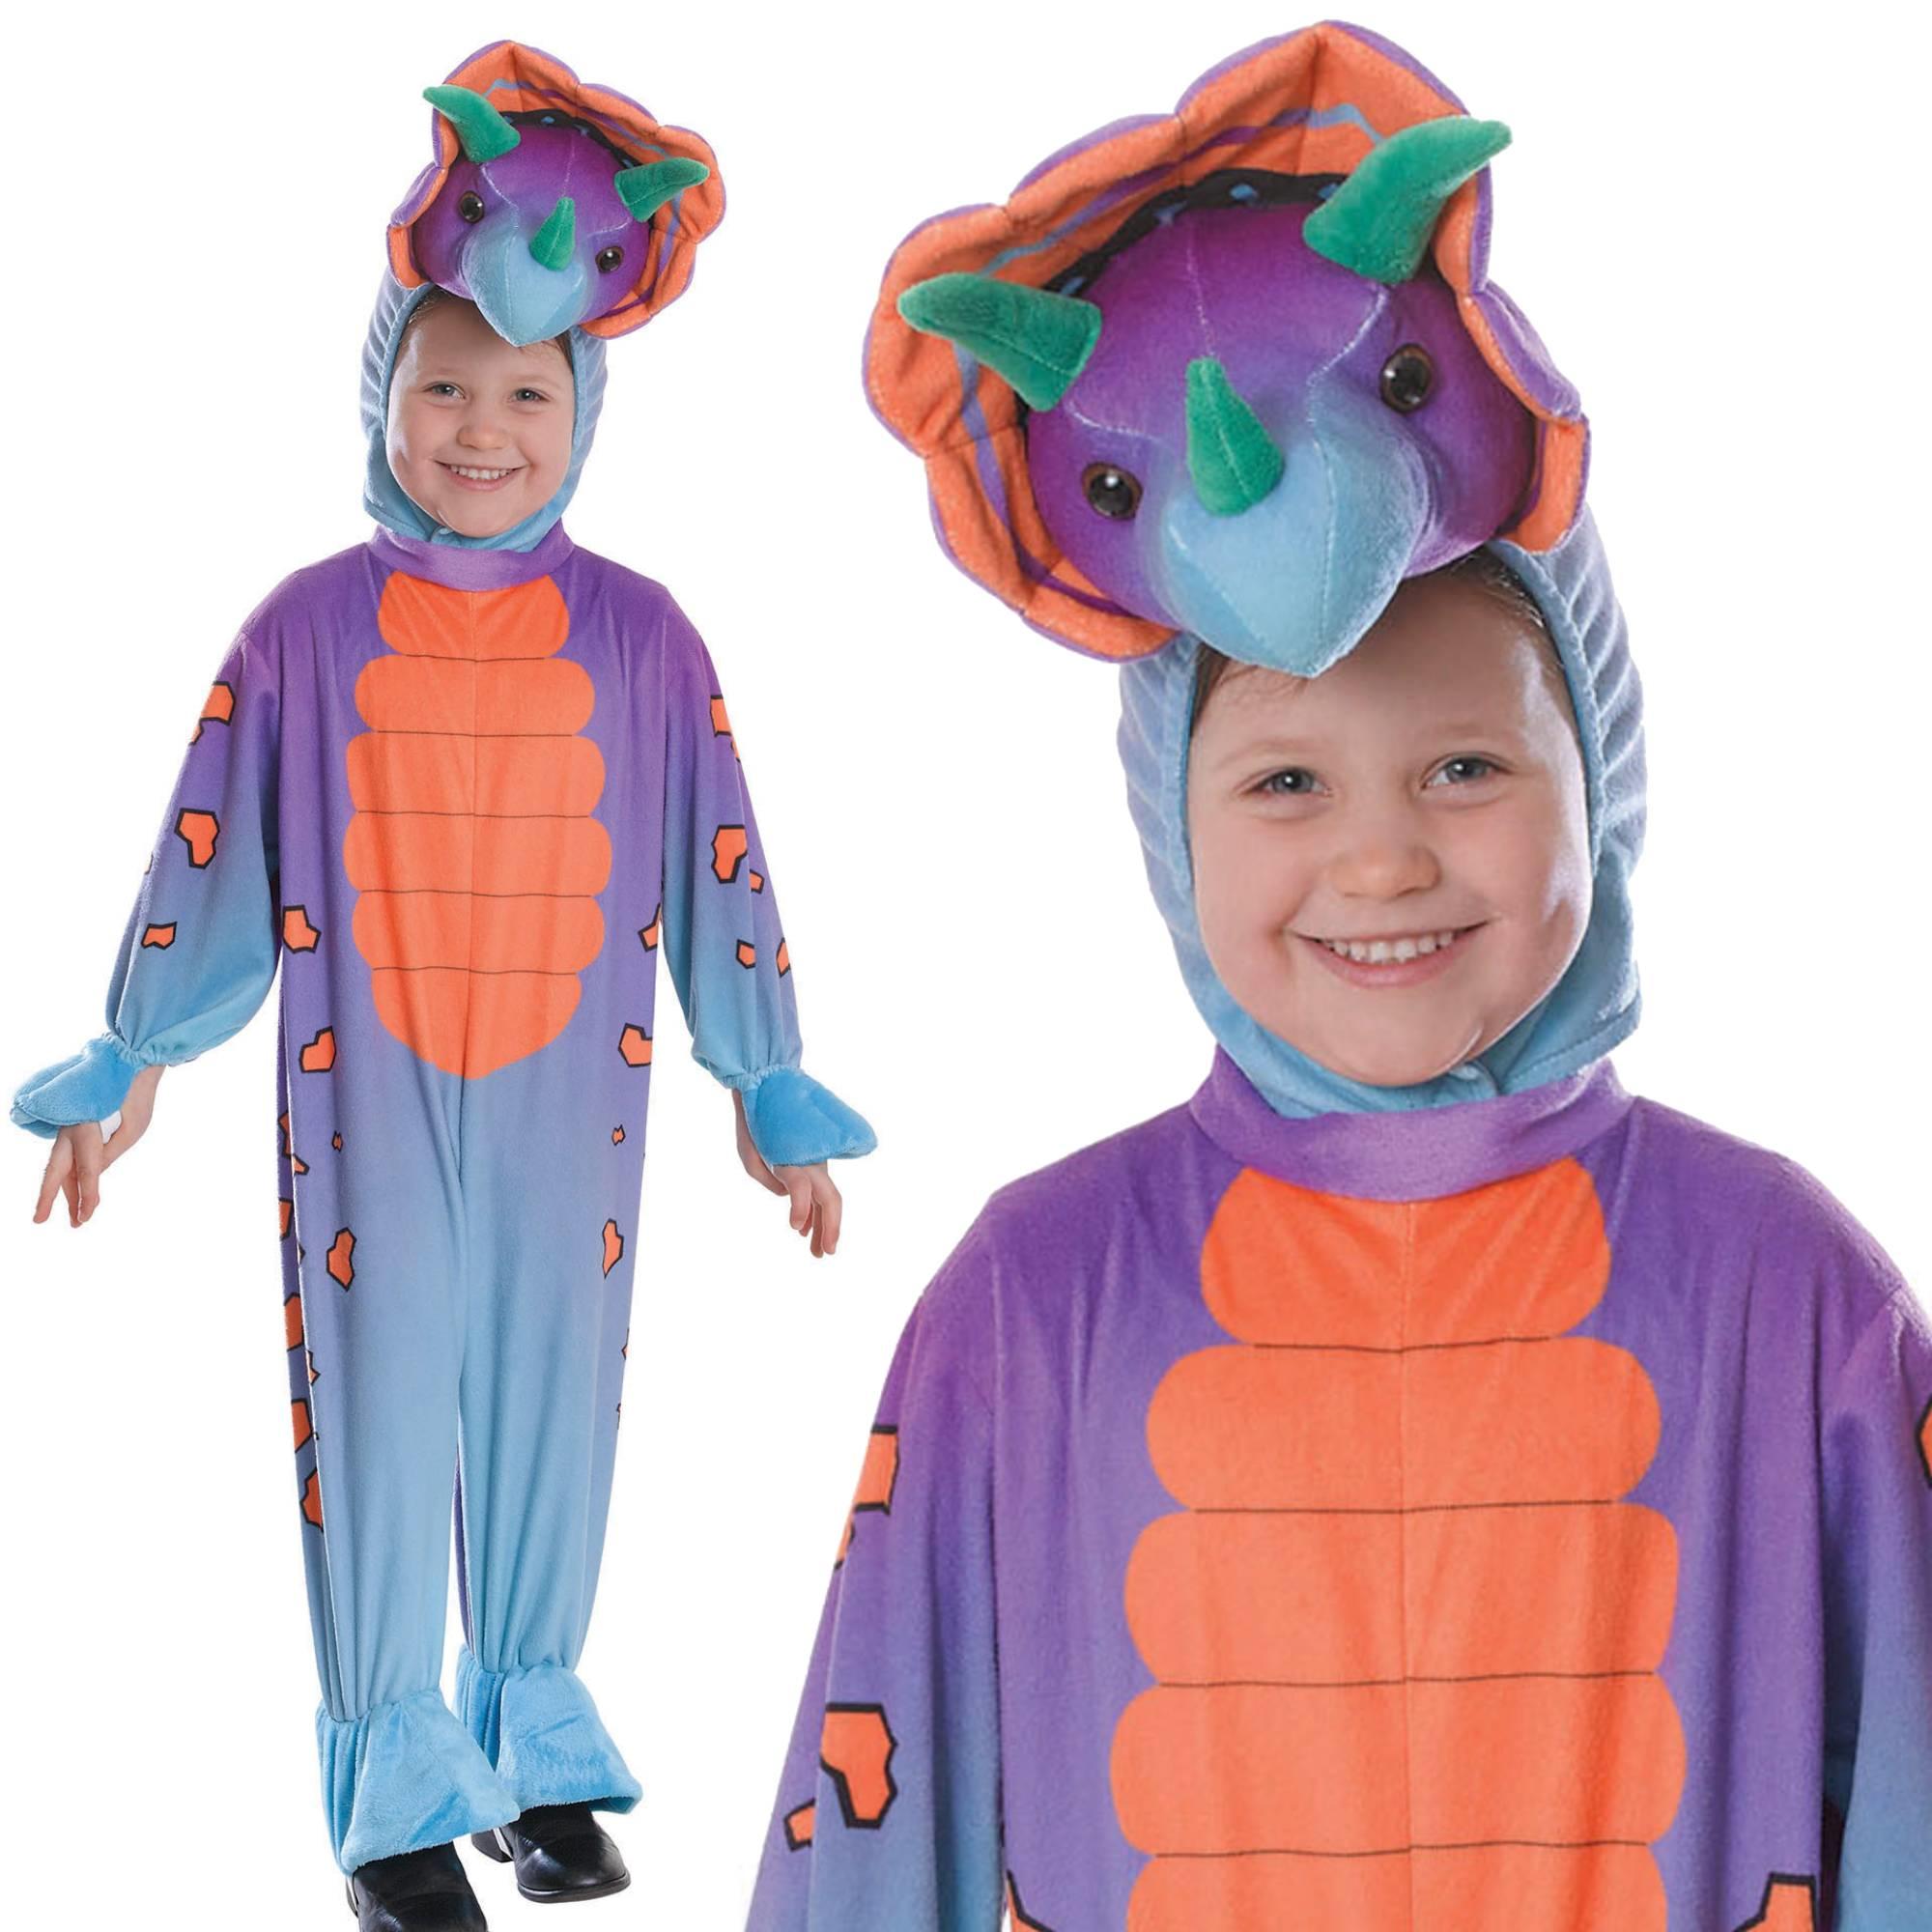 Jurassic Park inspired Triceratops Fancy Dress Costume for children with jumpsuit and headpiece by Bristol Novelties CC084 / CC085 available here at Karnival Costumes online party shop